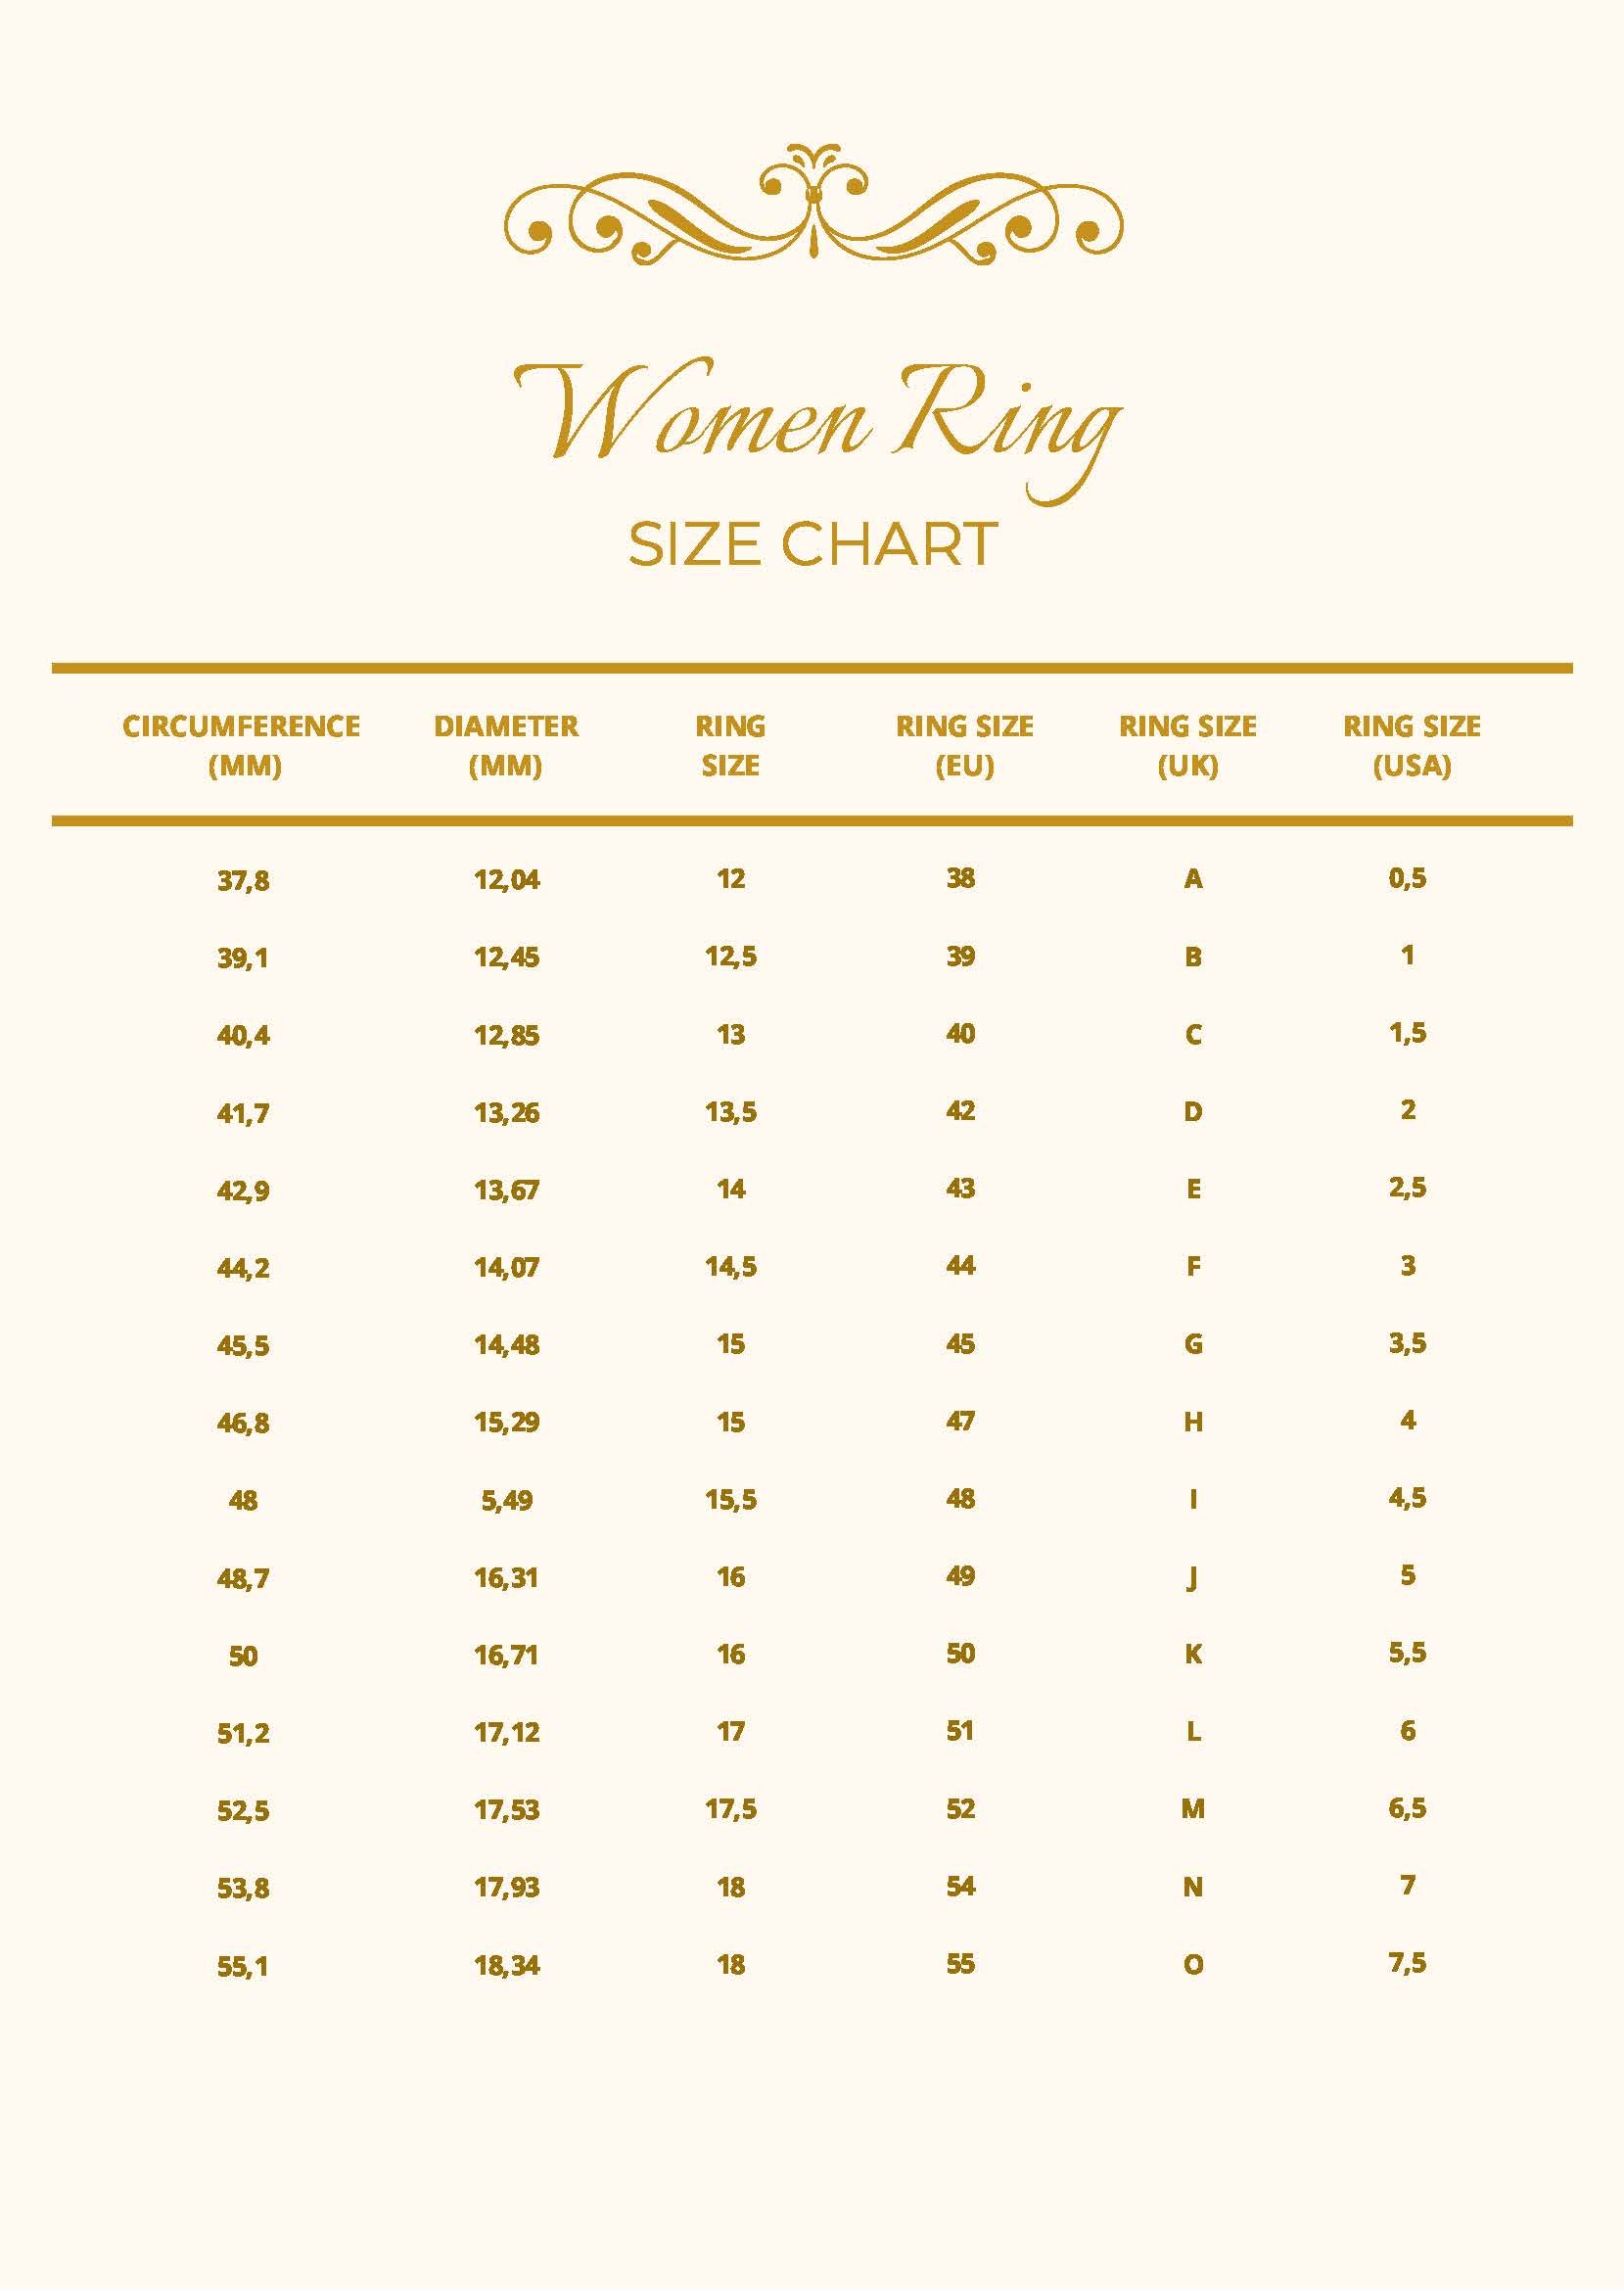 Womens Old Navy Size Chart